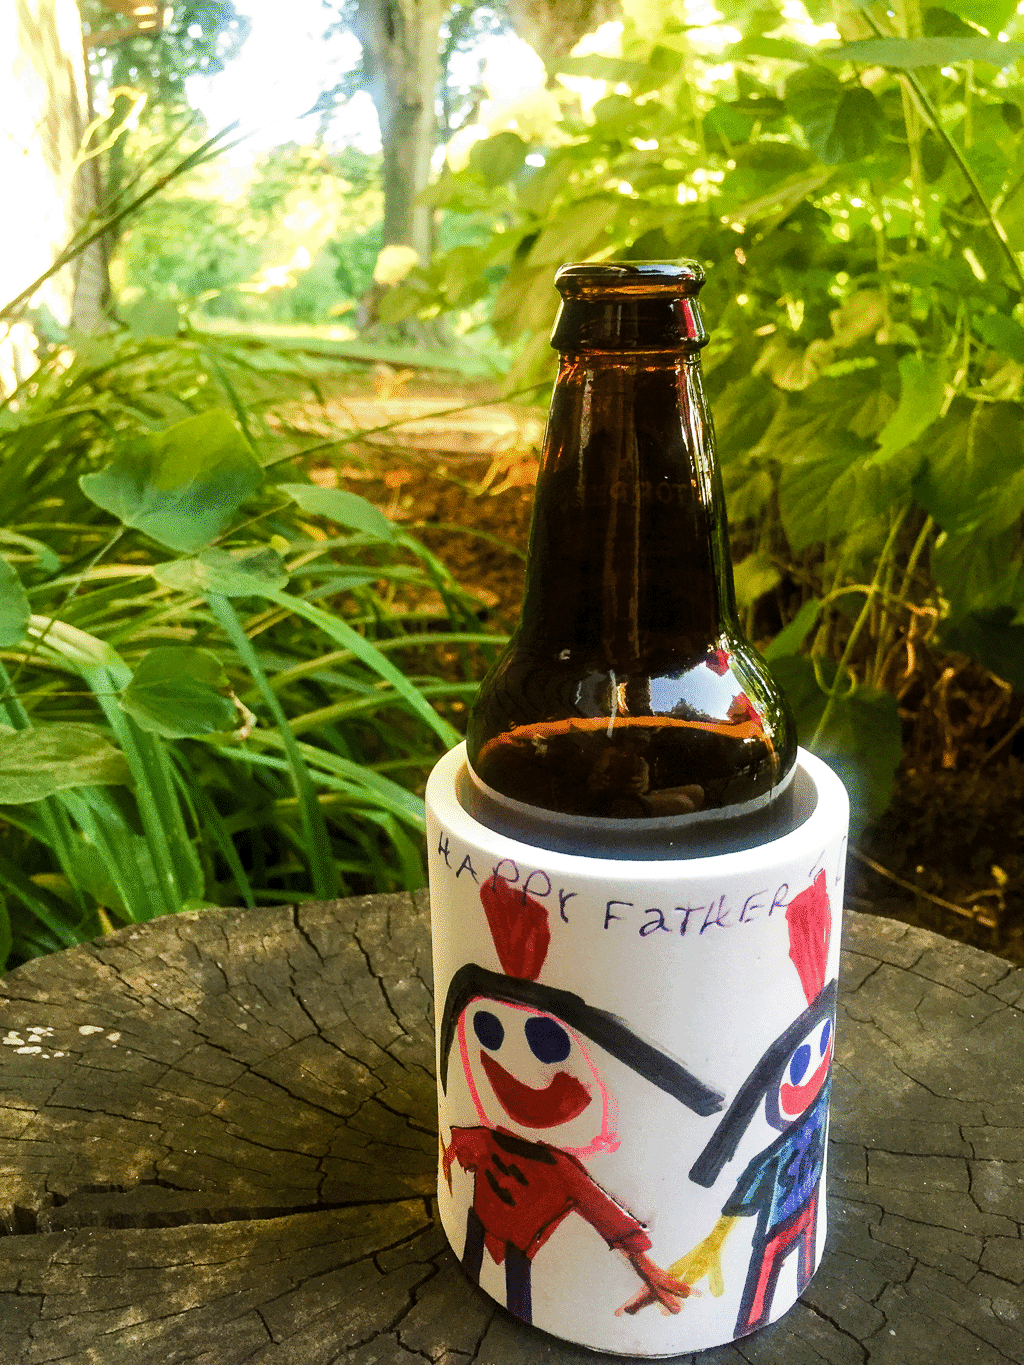 DIY drink coozie to cool dad's bottles and cans. Cute and easy Father's Day gift idea from the kids!